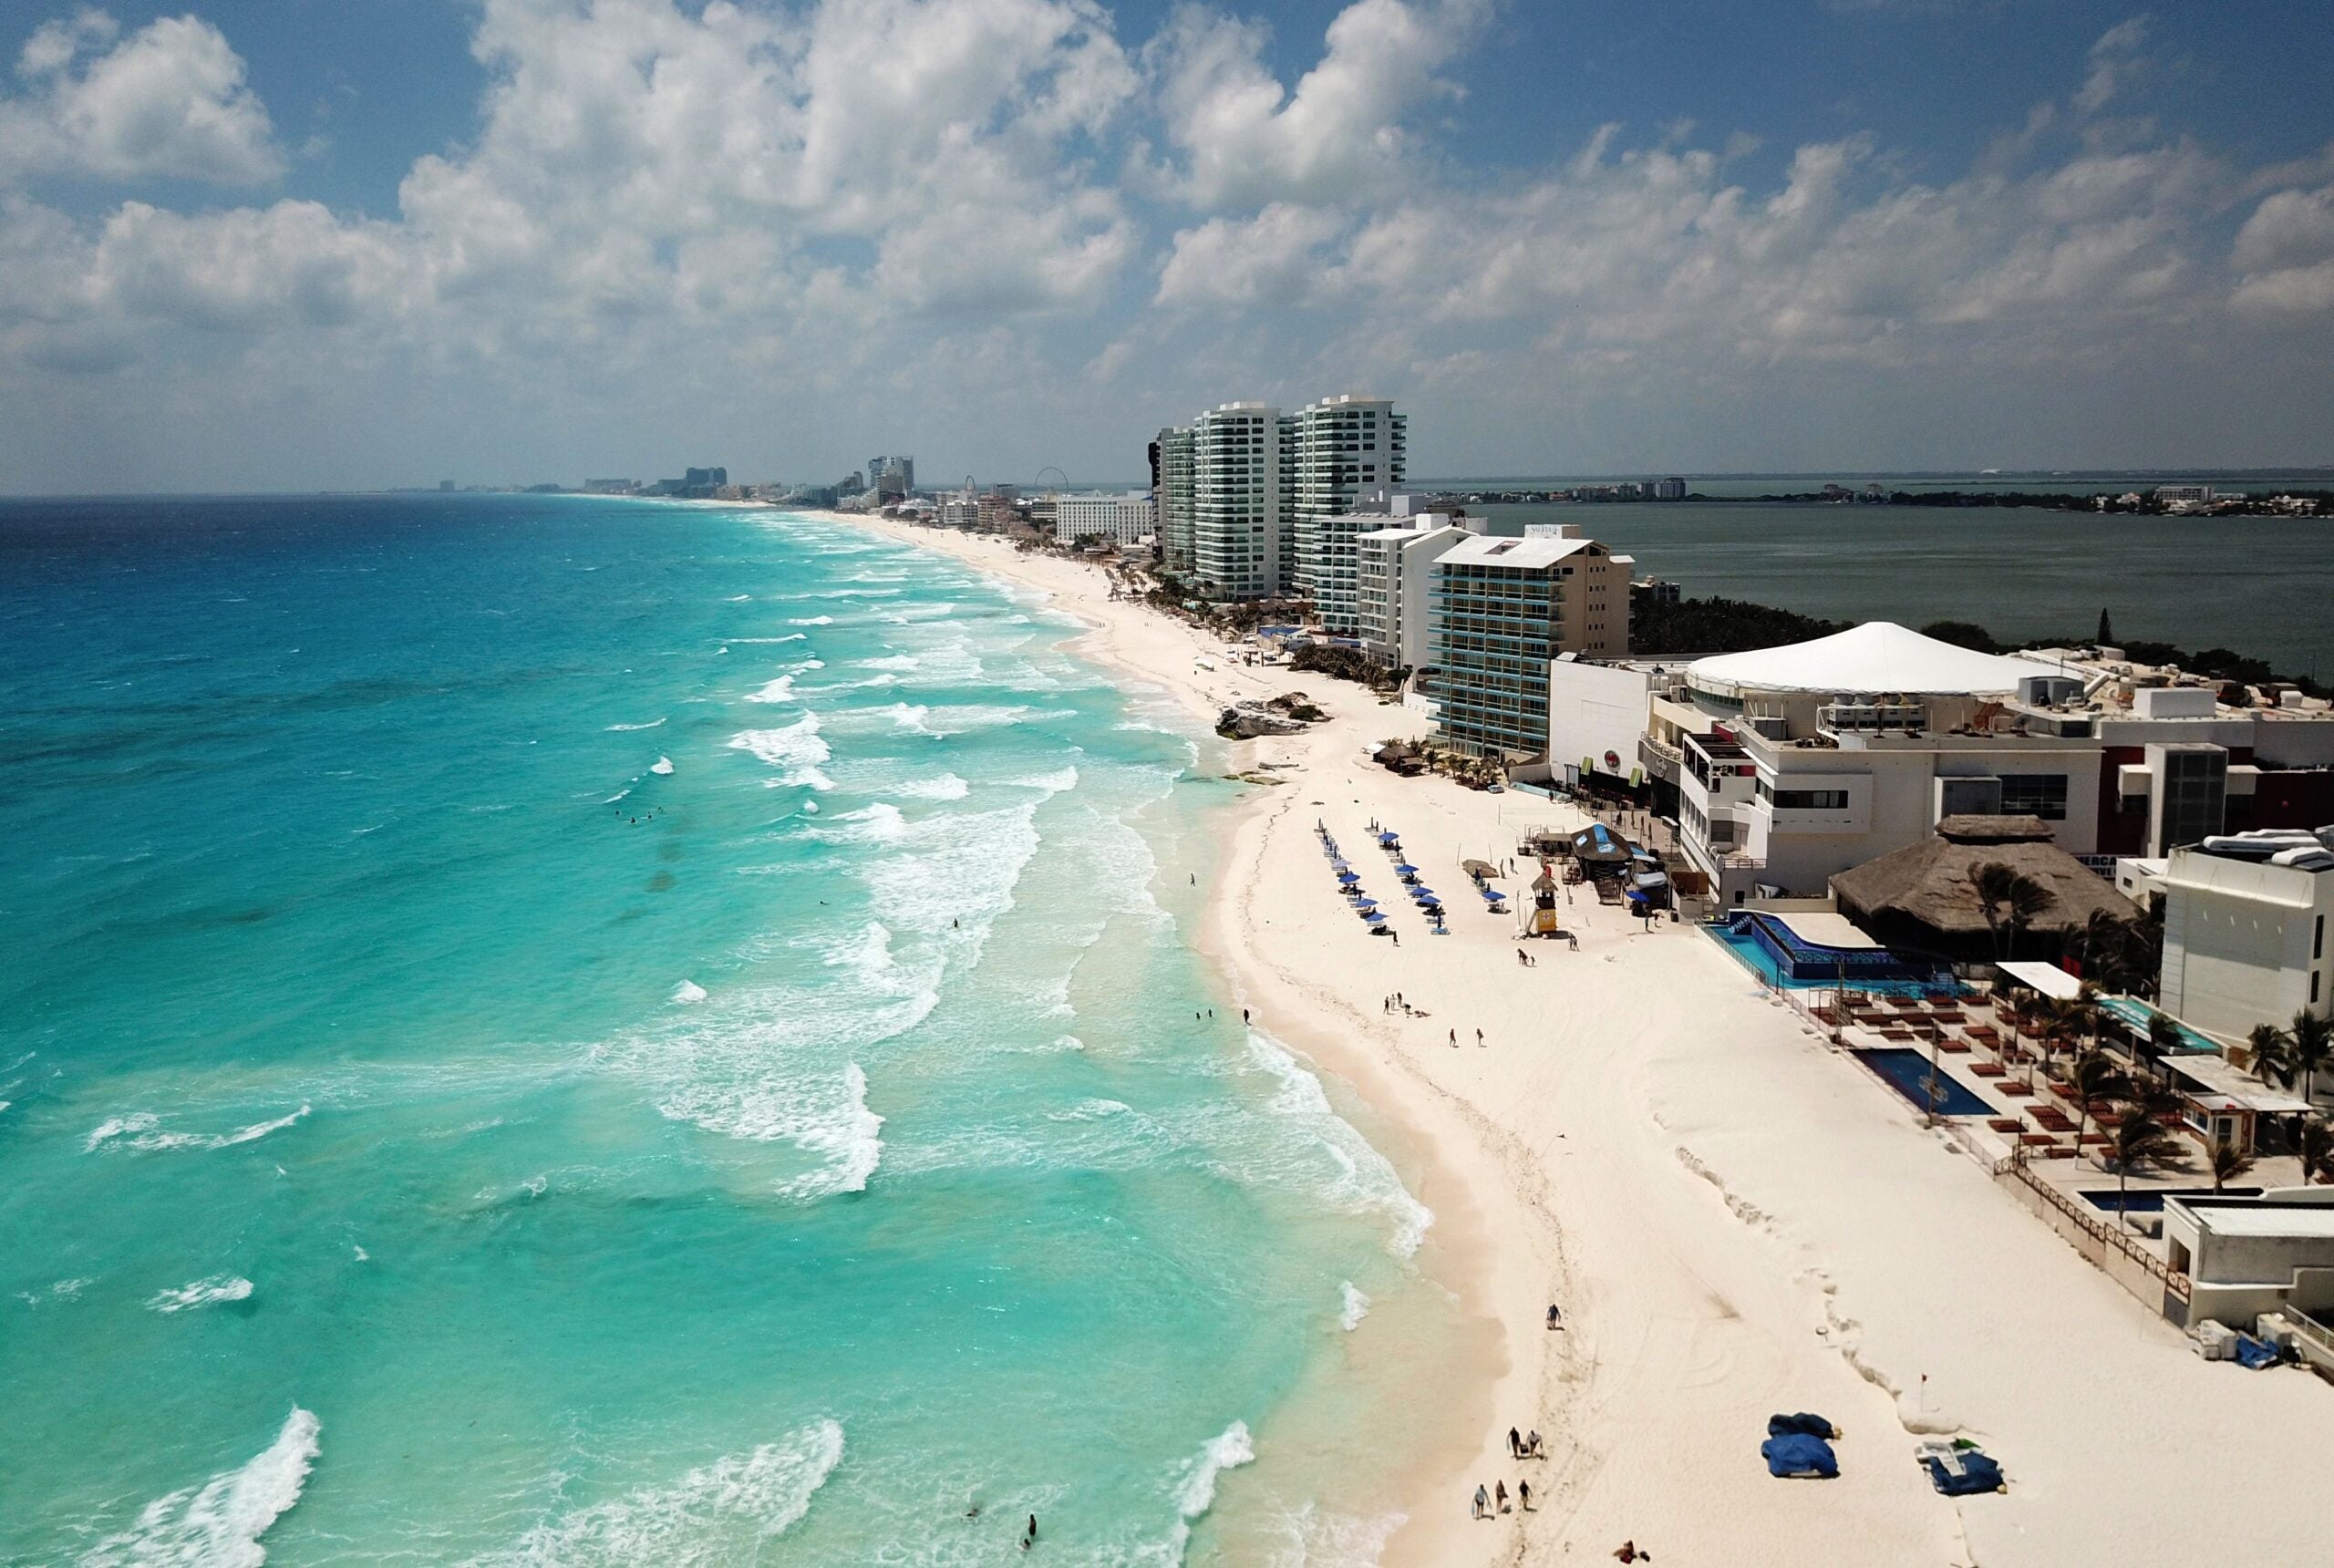 Cancun travel advisory: State Department issues warning to US travelers heading to Mexico